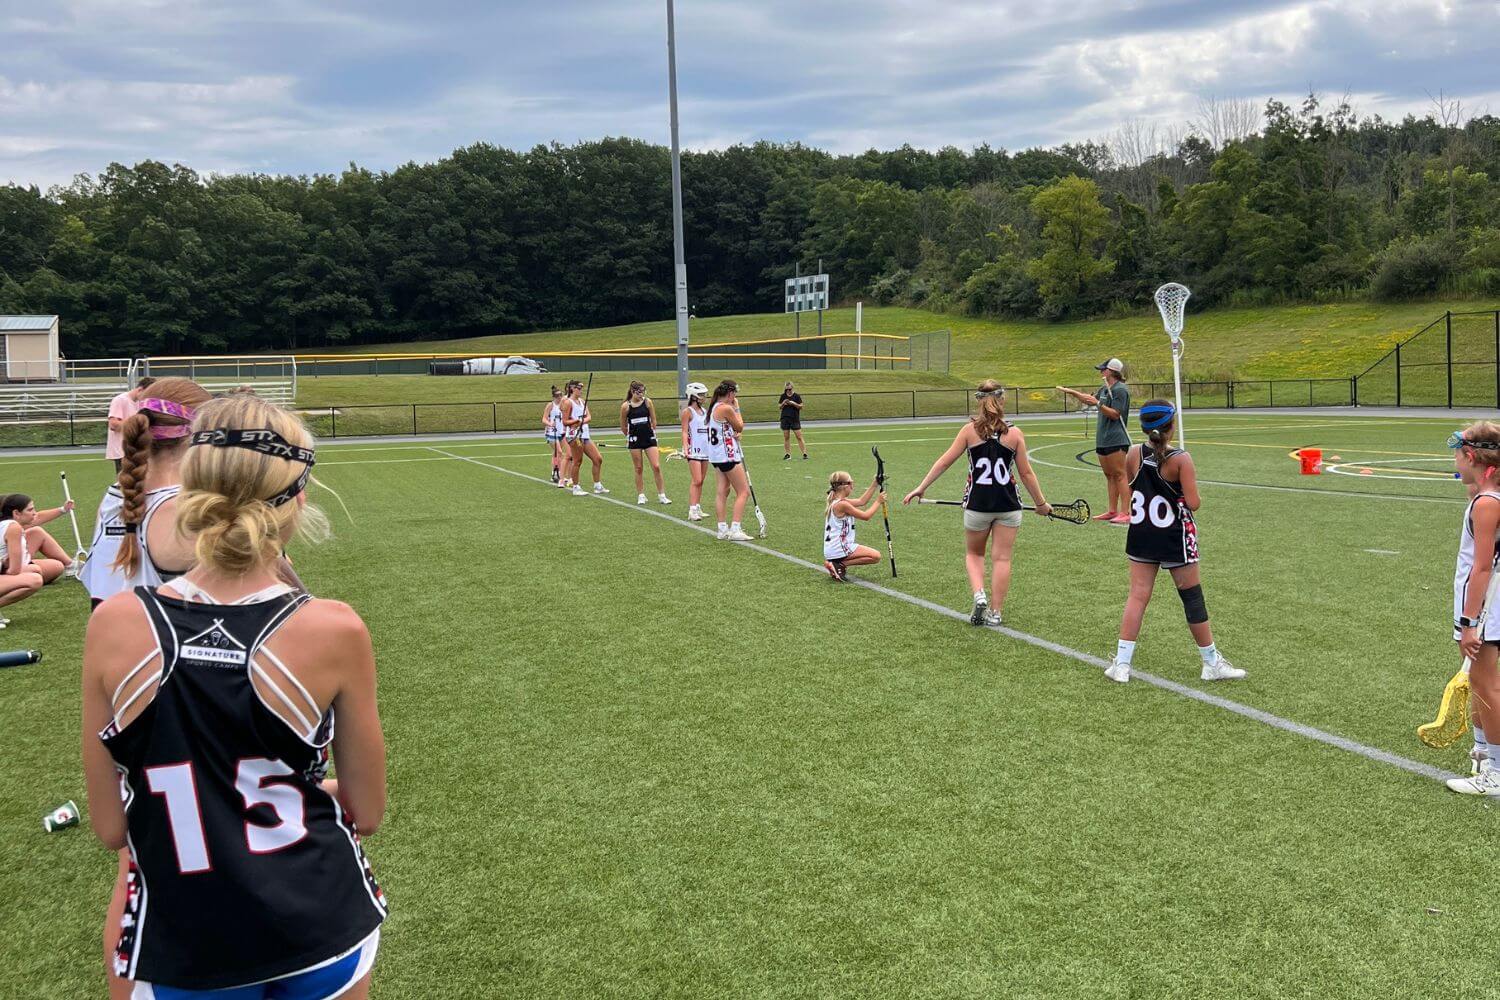 Female lacrosse players receiving instruction from a professional lacrosse player during camp